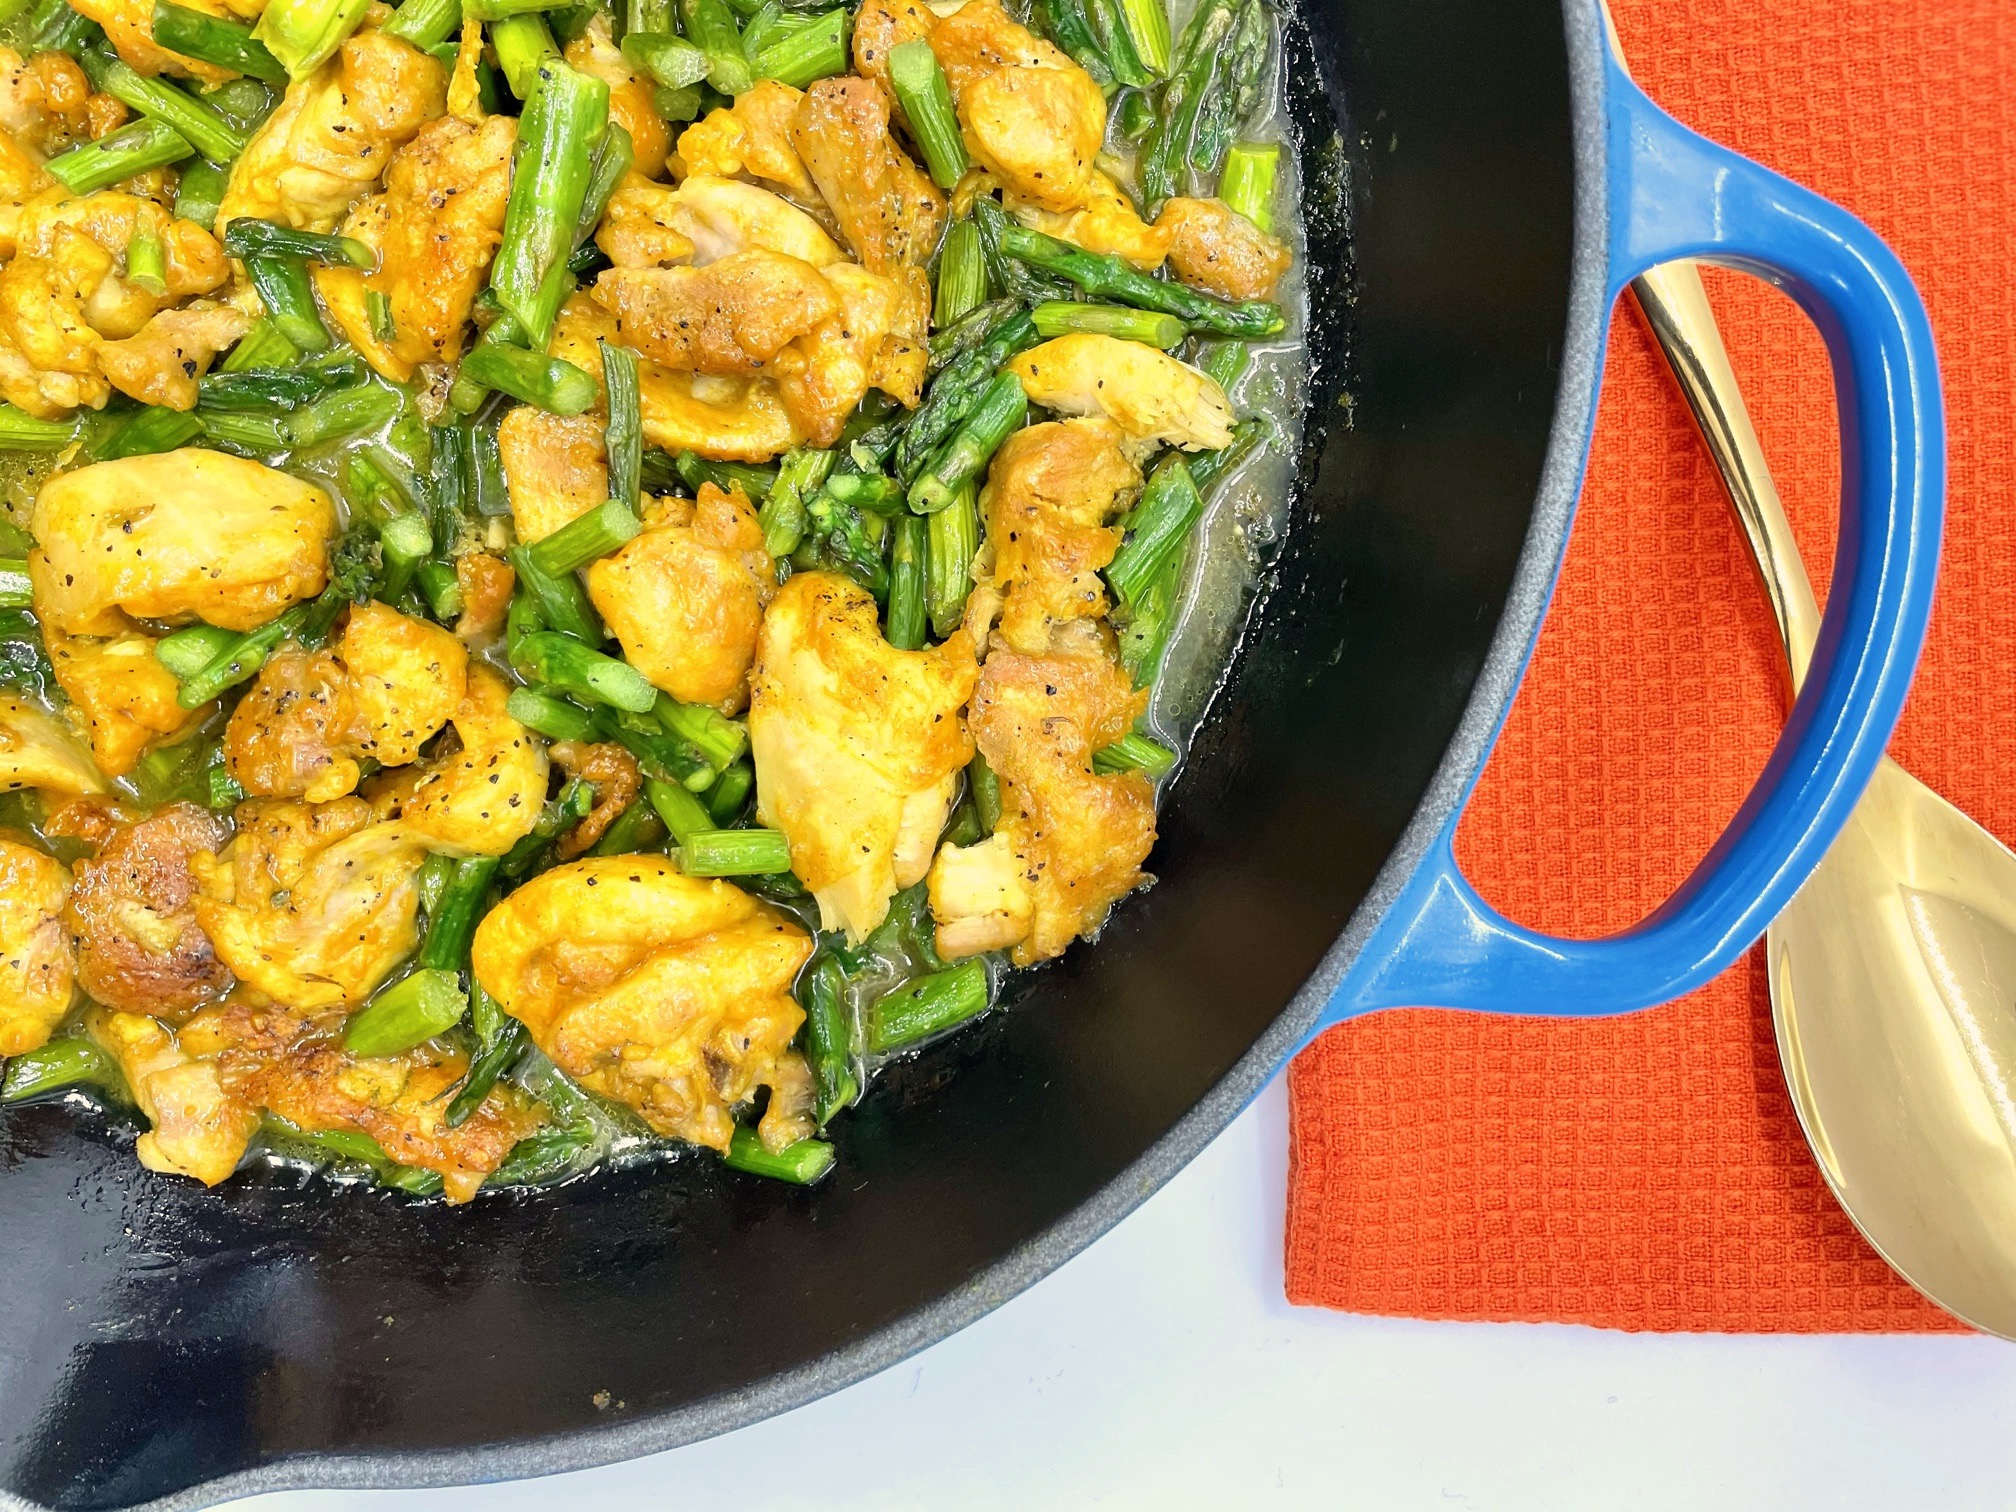 Turmeric Black Pepper Chicken with Asparagus